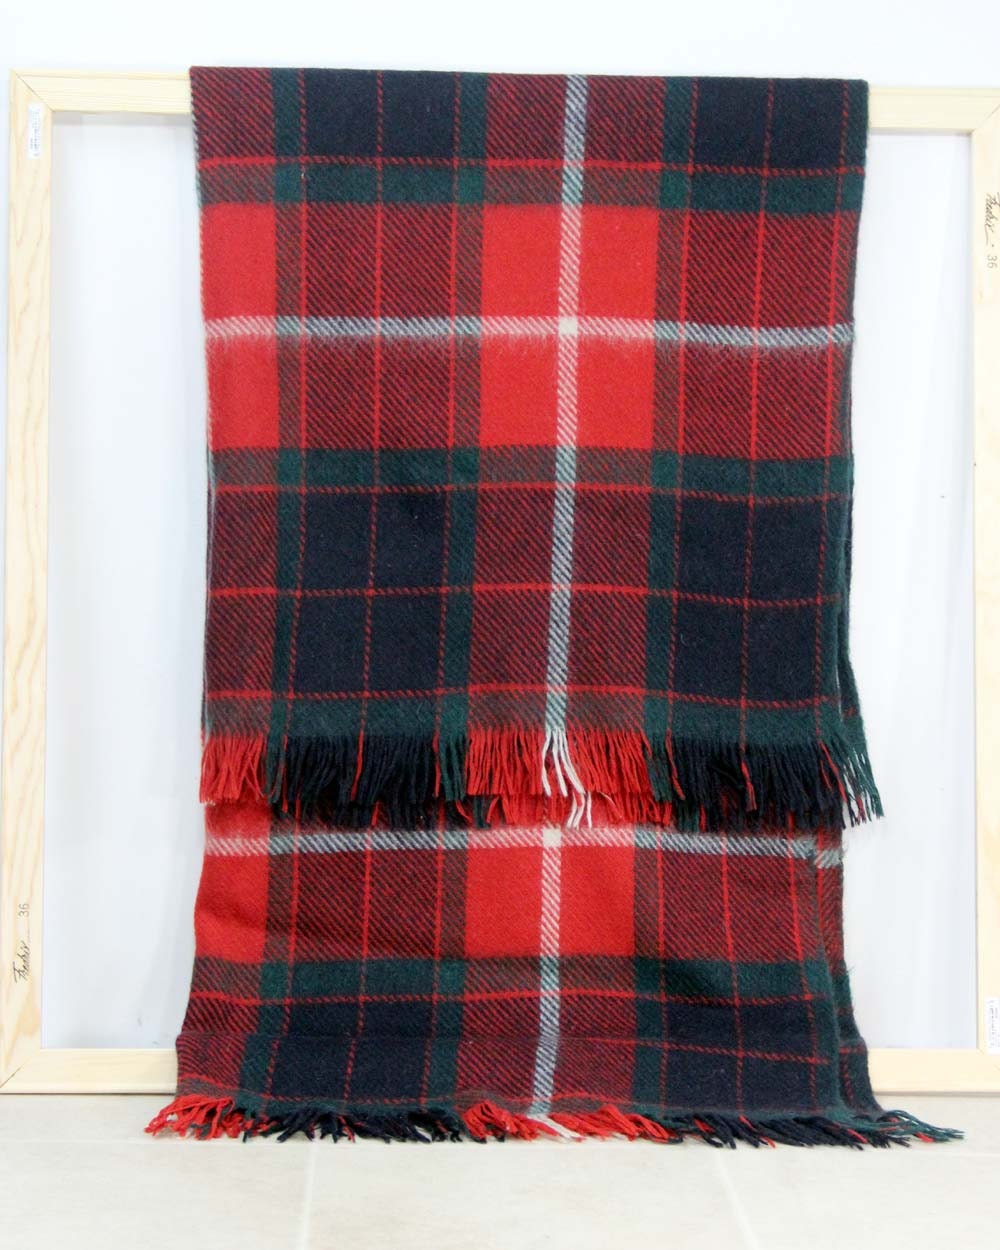 Red Plaid Blanket / Sofa Throw from Wool and Mohair